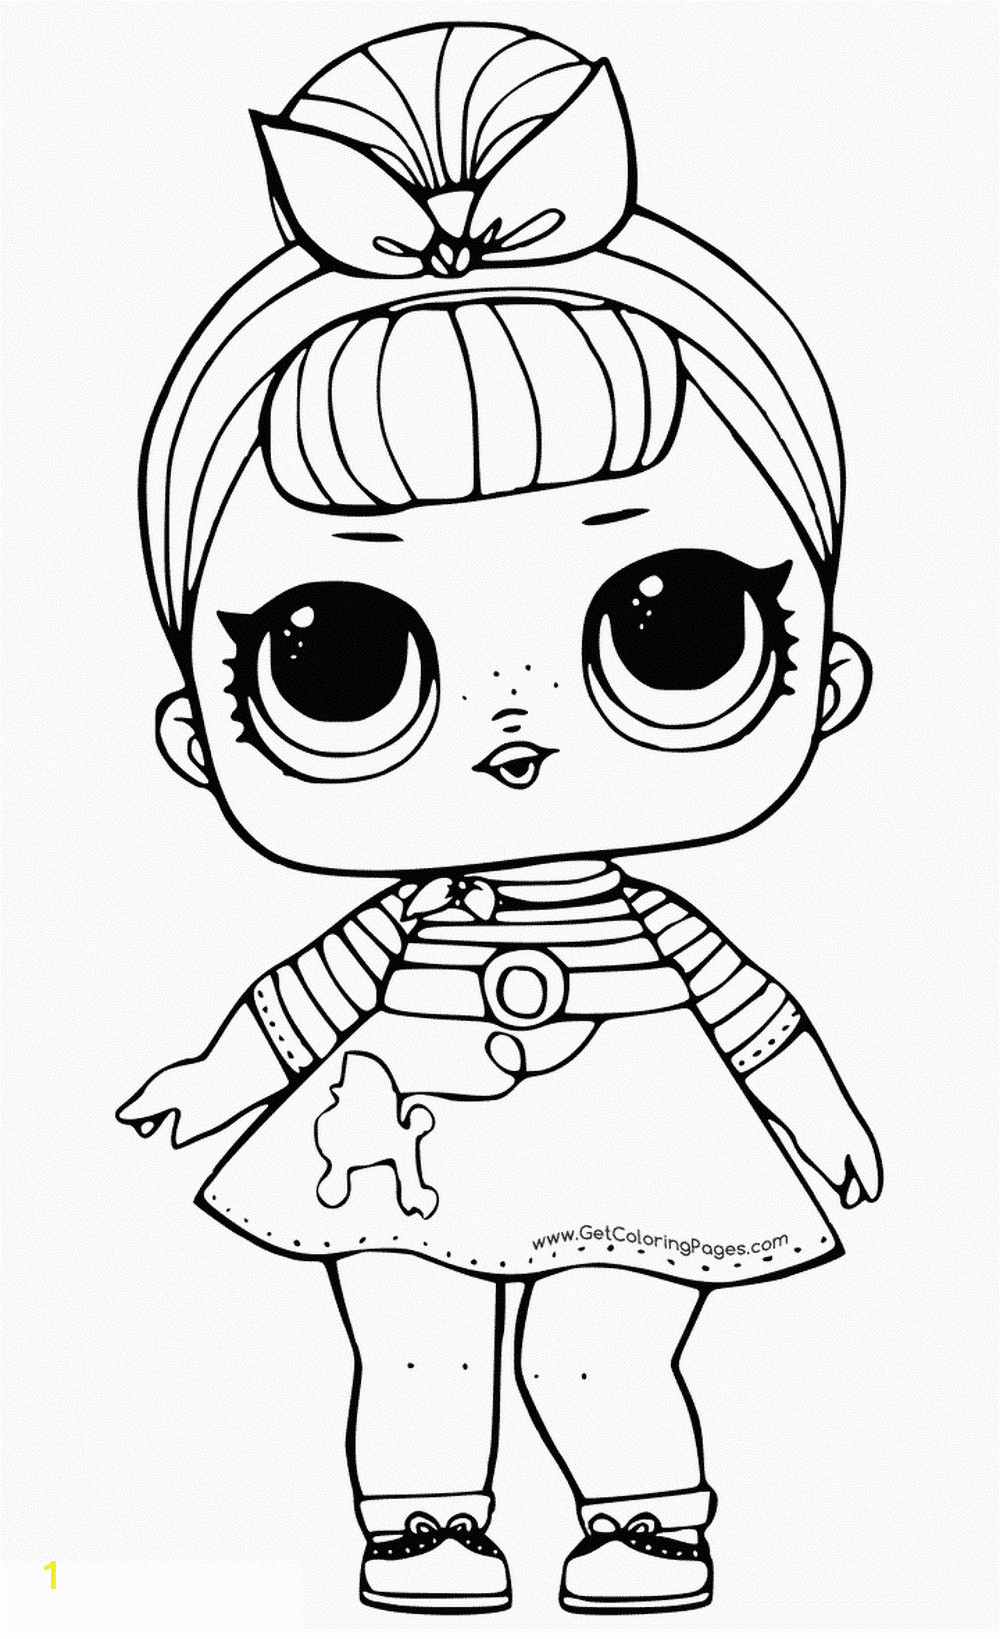 Free Printable Lol Doll Coloring Pages Lol Surprise Dolls Coloring Pages Print them for Free